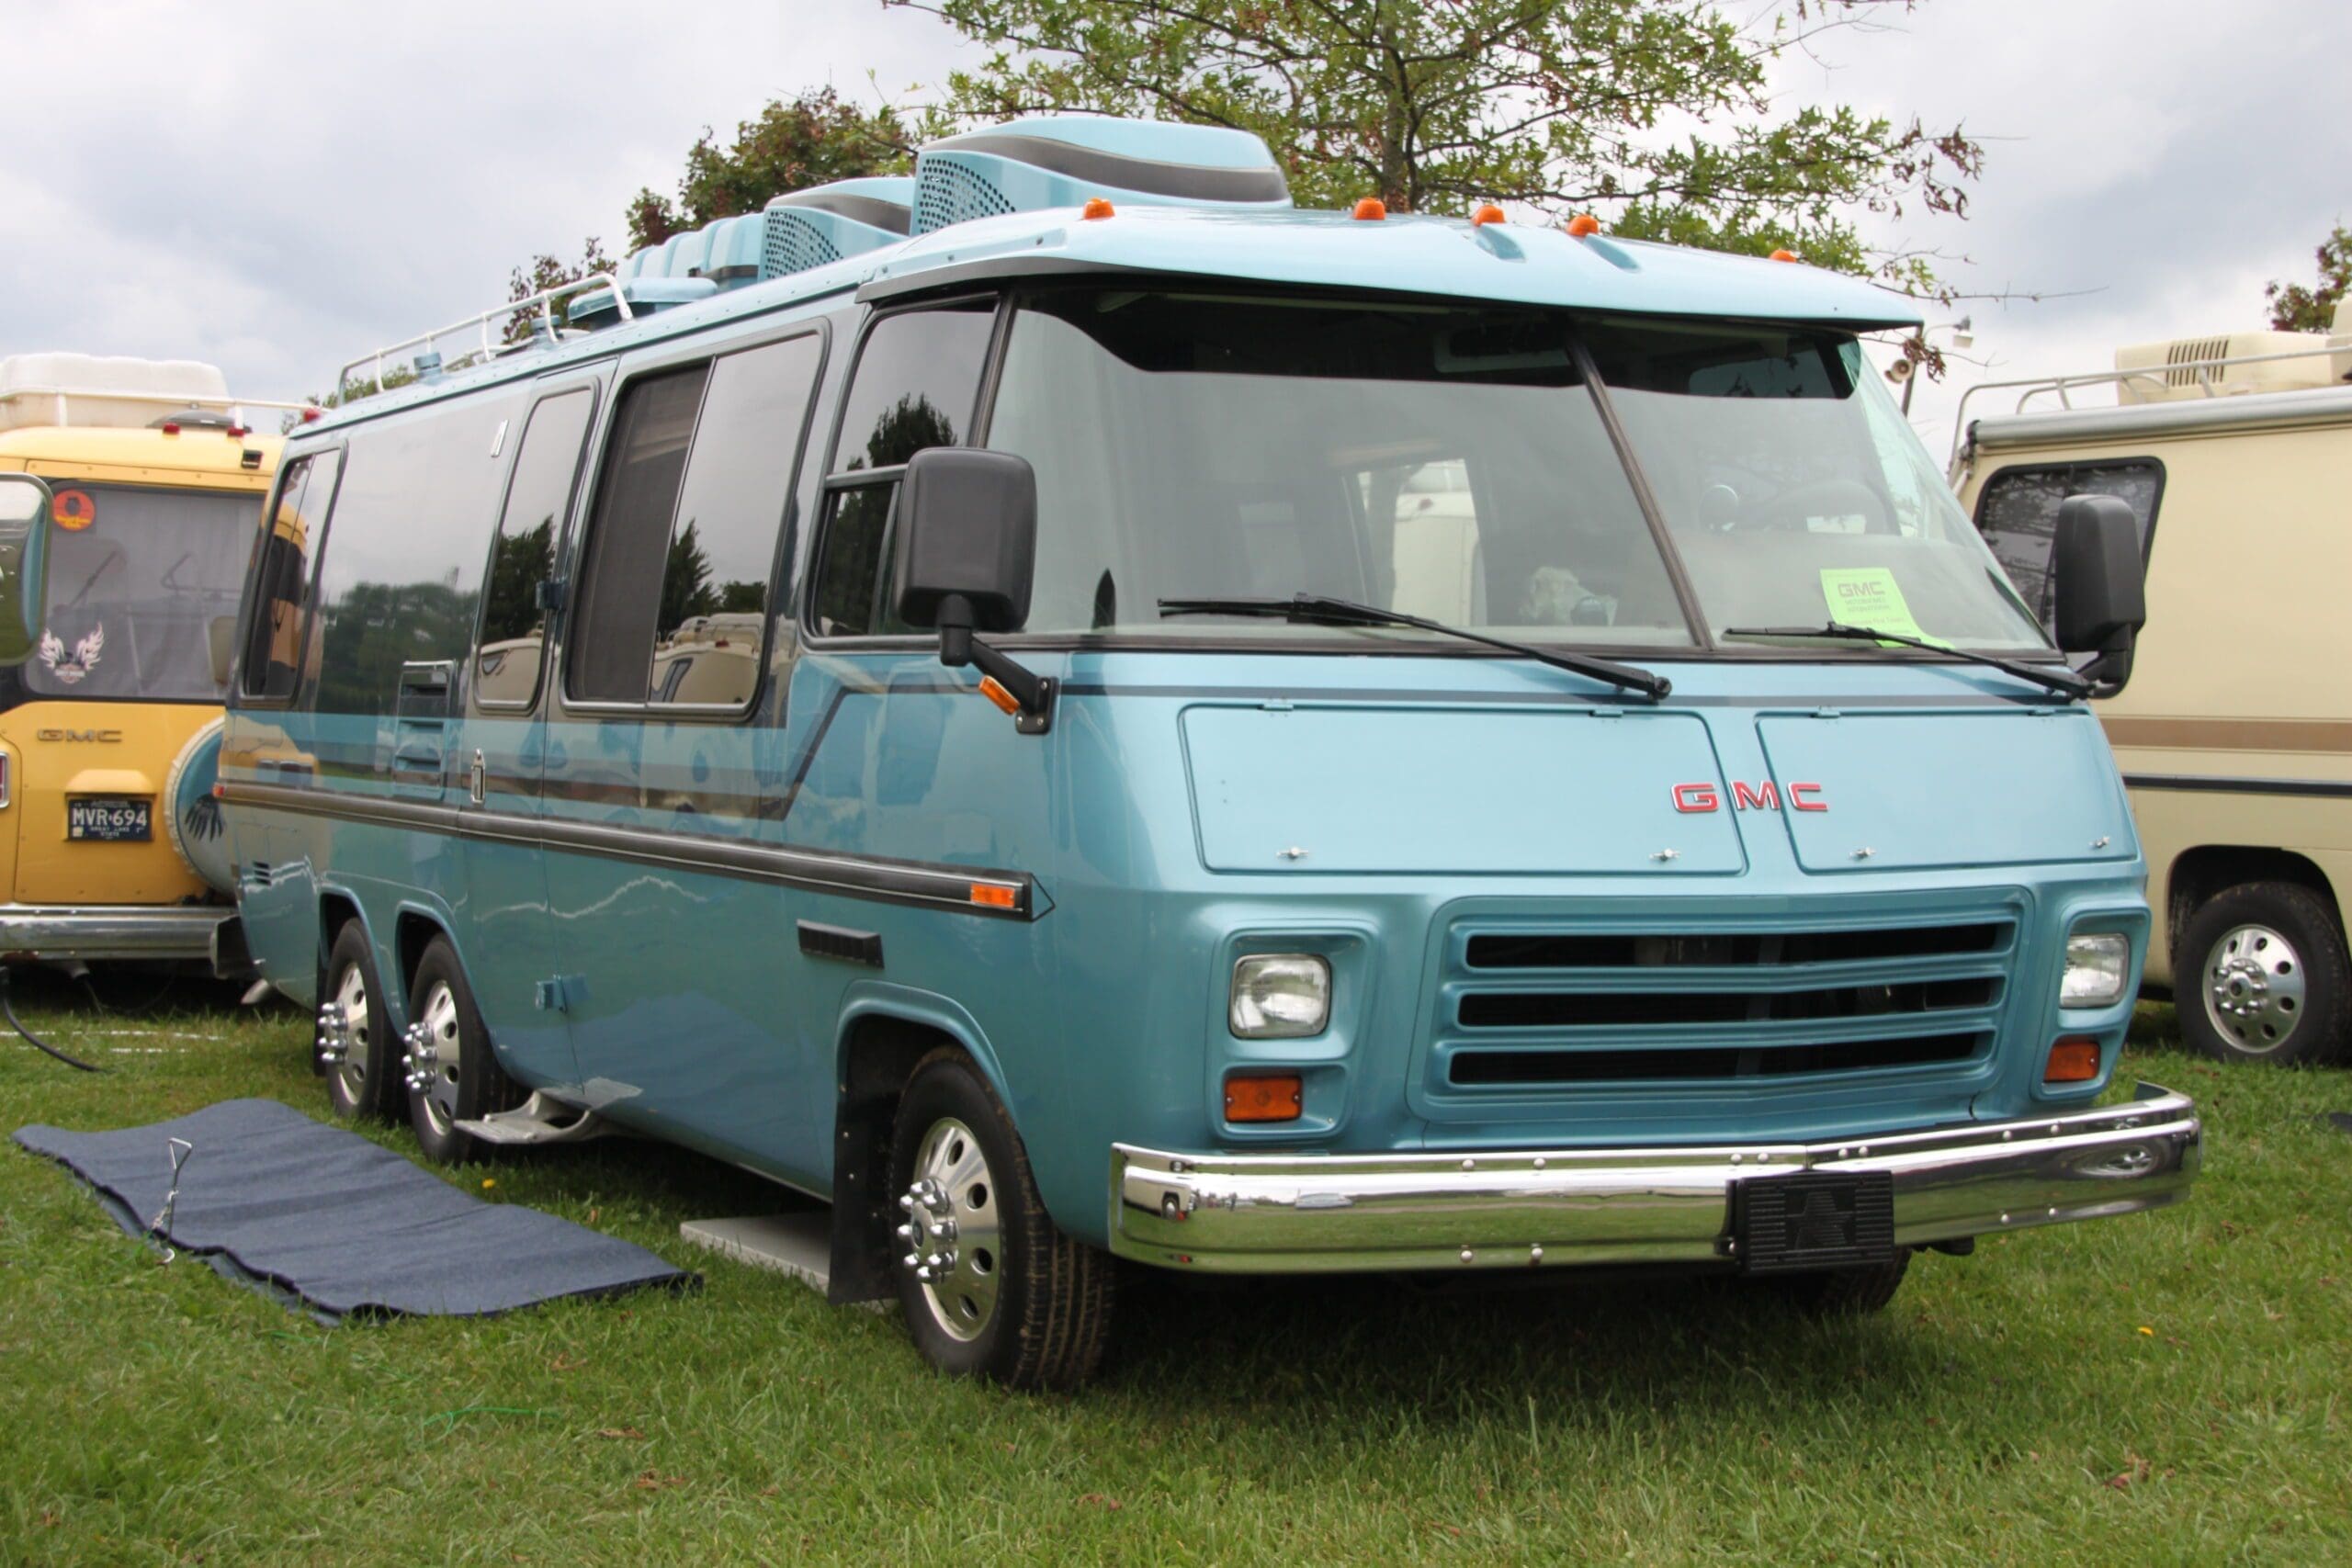 #RALLY/GMCMOTORHOME: Come and Celebrate GMCMI’s 40th Anniversary in Tennessee!